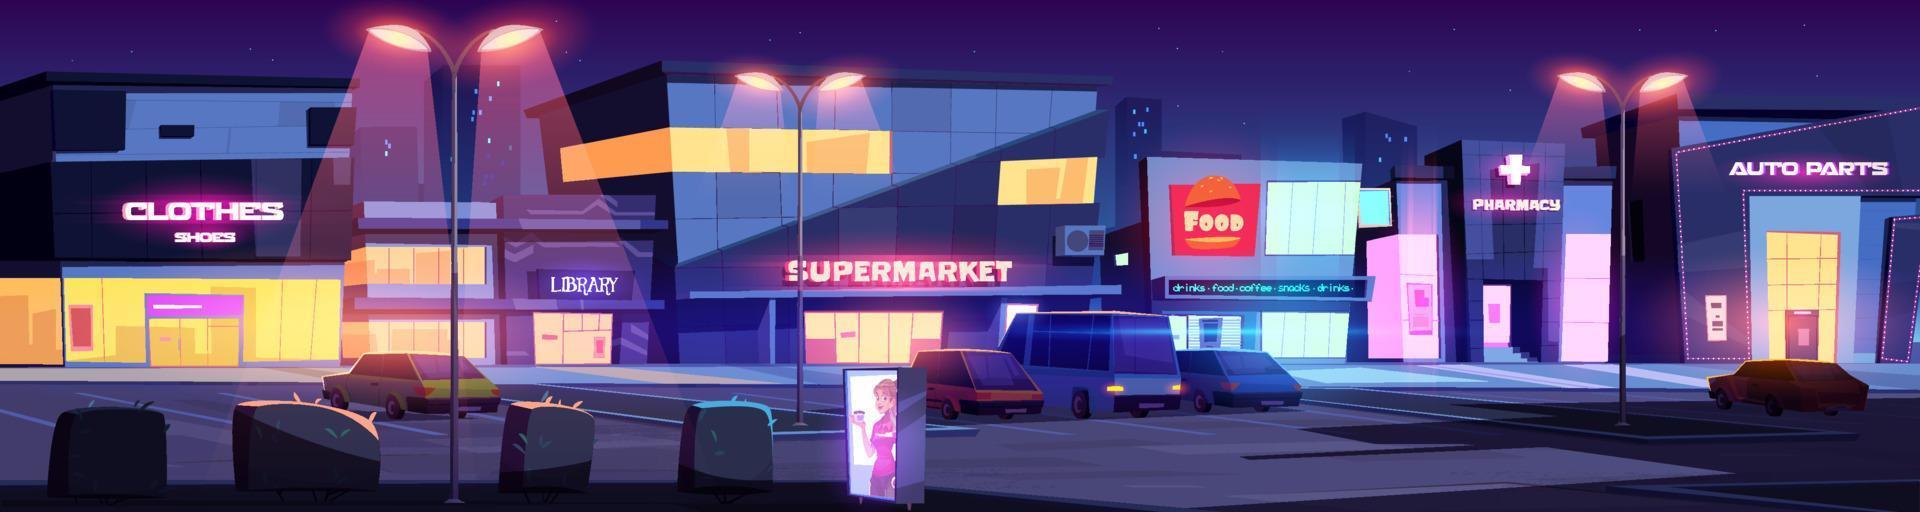 City street with shops and parking at night vector